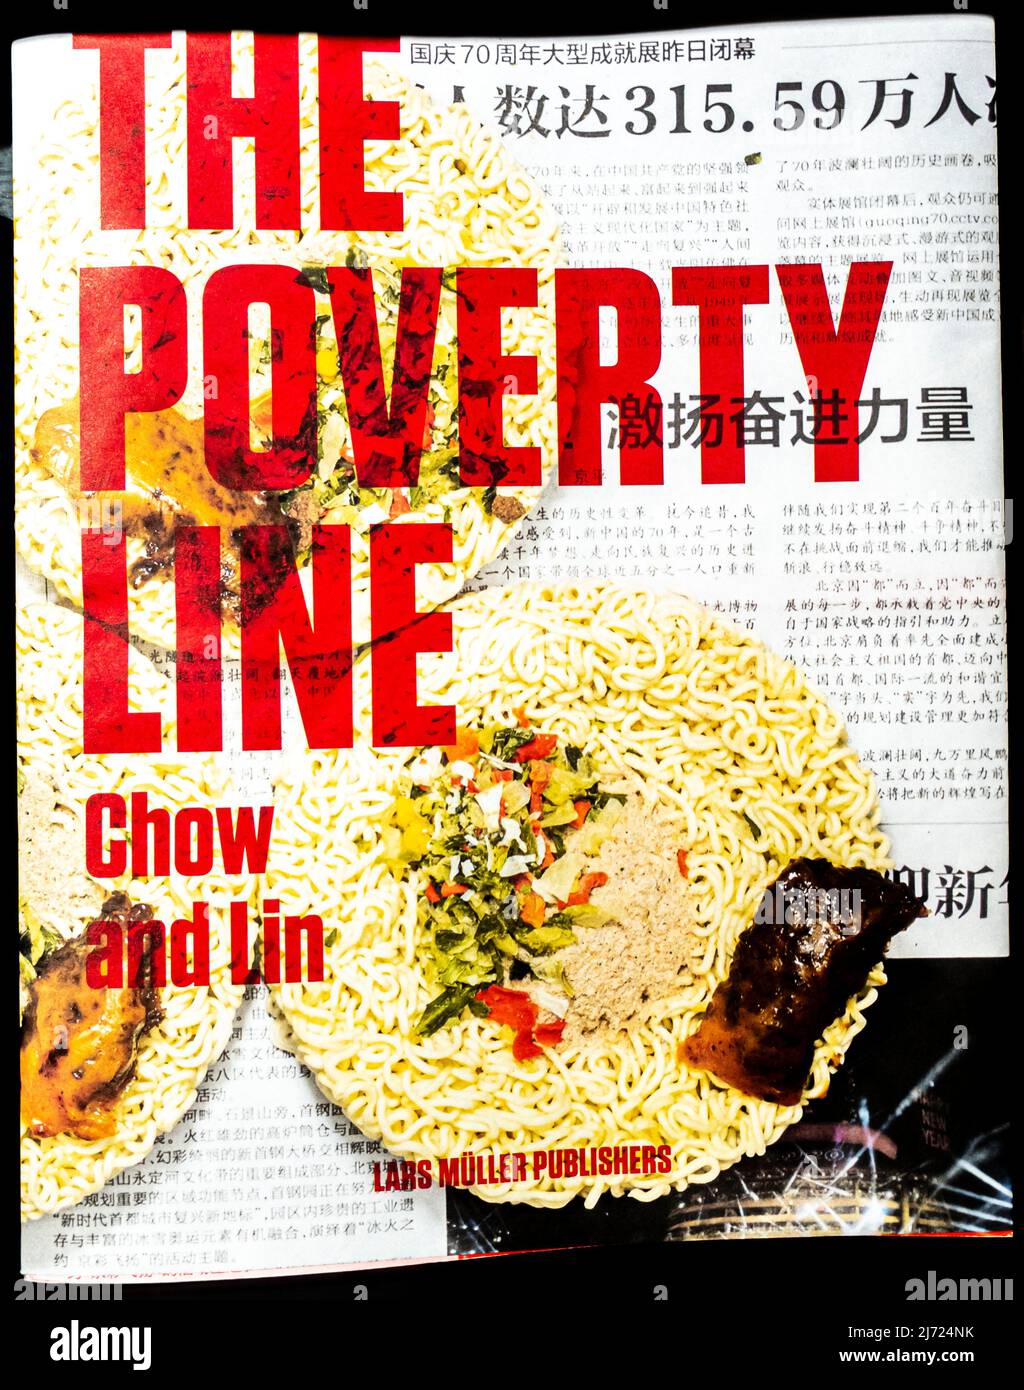 Chow and Lin: The Poverty Line paperback. Beijing-based artist duo Stefen Chow and Huiyi Lin's book on poverty on sale, 2021 Stock Photo